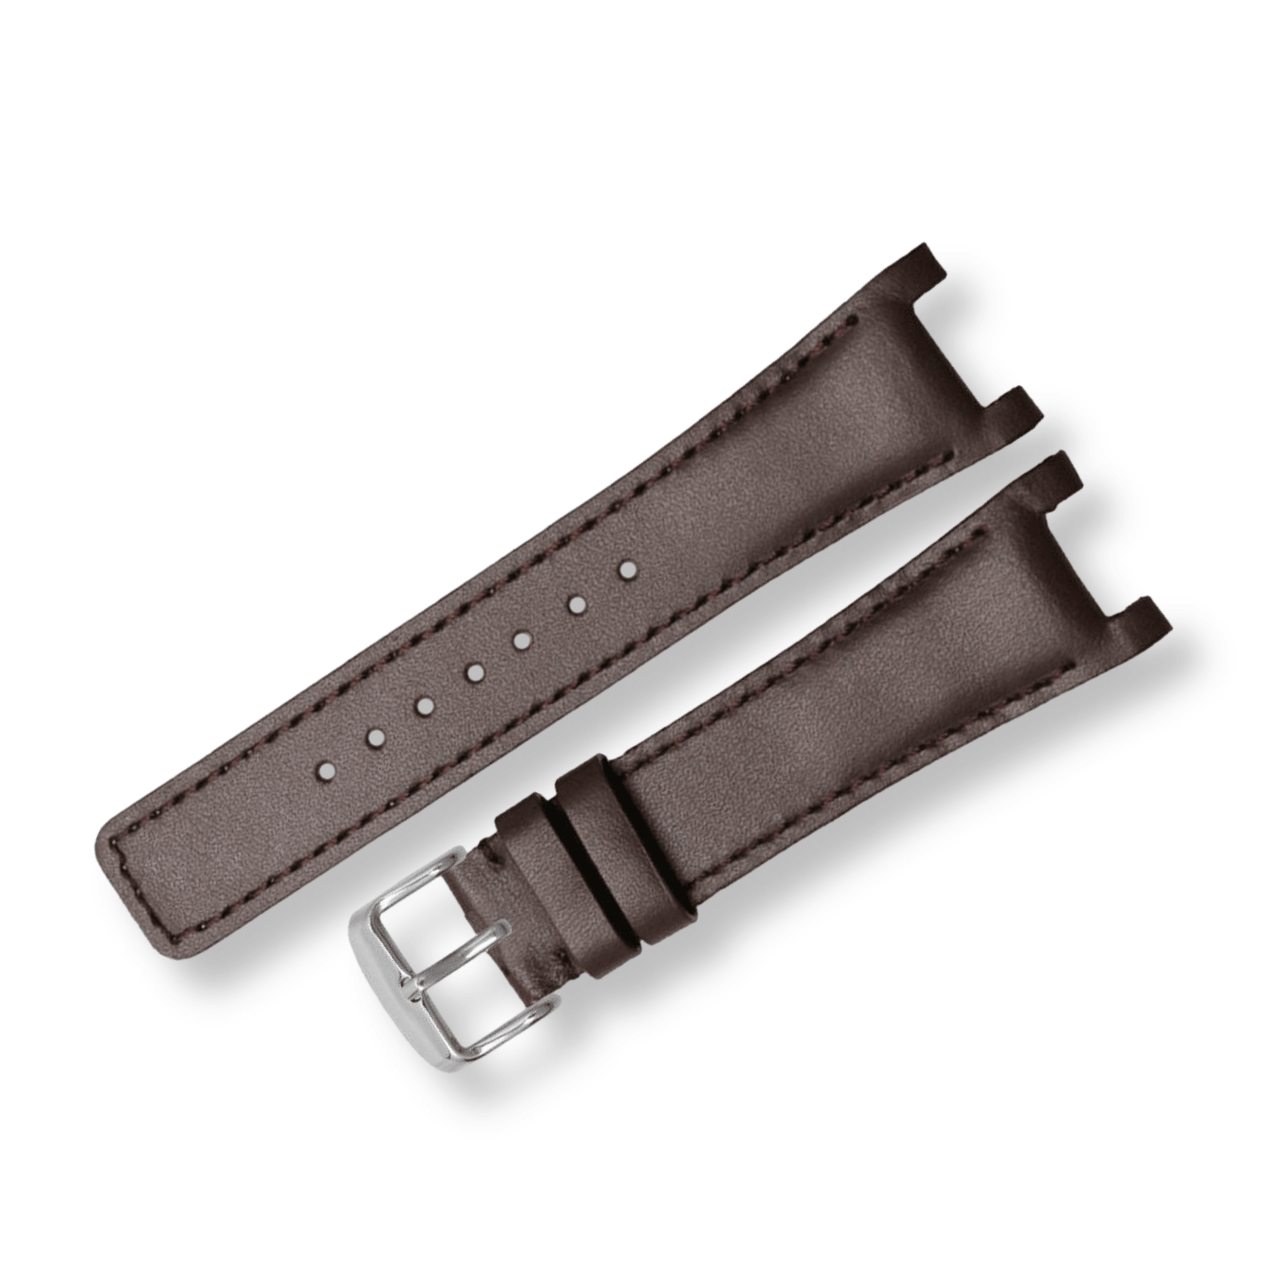 Genuine Notched Leather Watchband for Cartier Pasha - watchband.direct